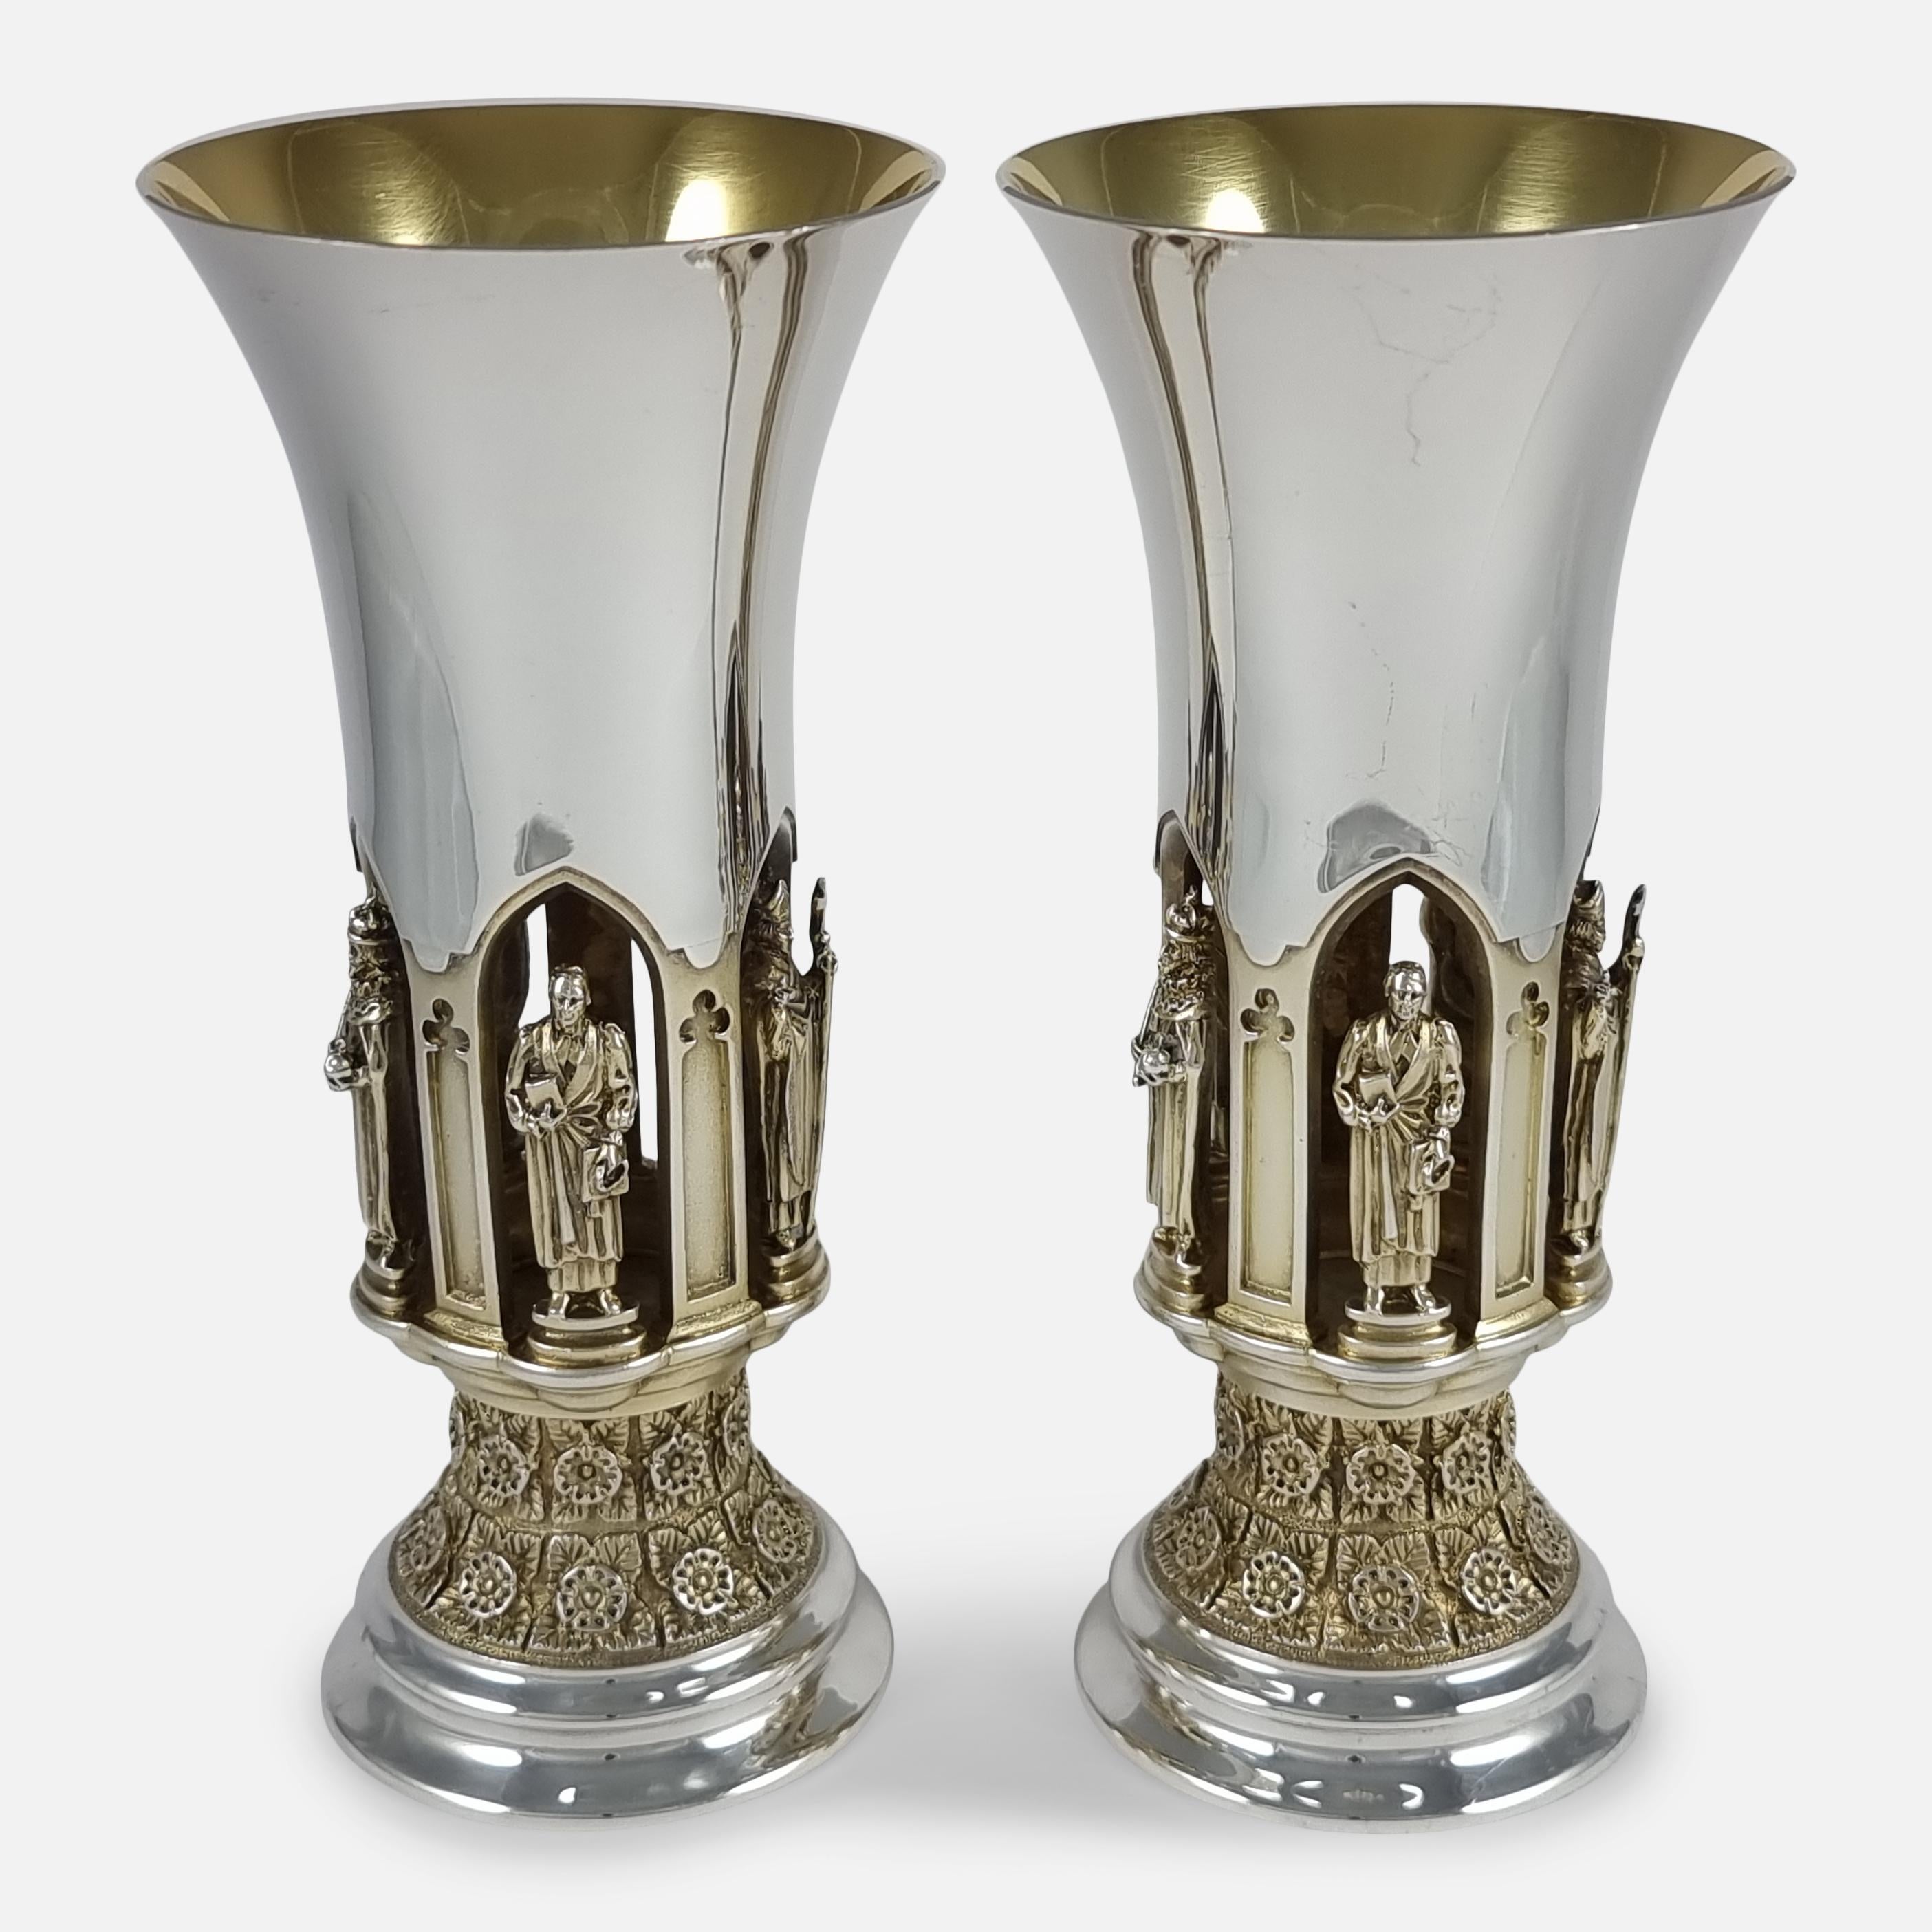 A pair of Parcel-Gilt sterling silver goblets, by Hector Miller for Aurum, London, 1985. The goblets are numbered 246, and 247, from a limited edition of 500. The goblets are each crafted with a trumpet shaped bowl above a pierced gilded gallery